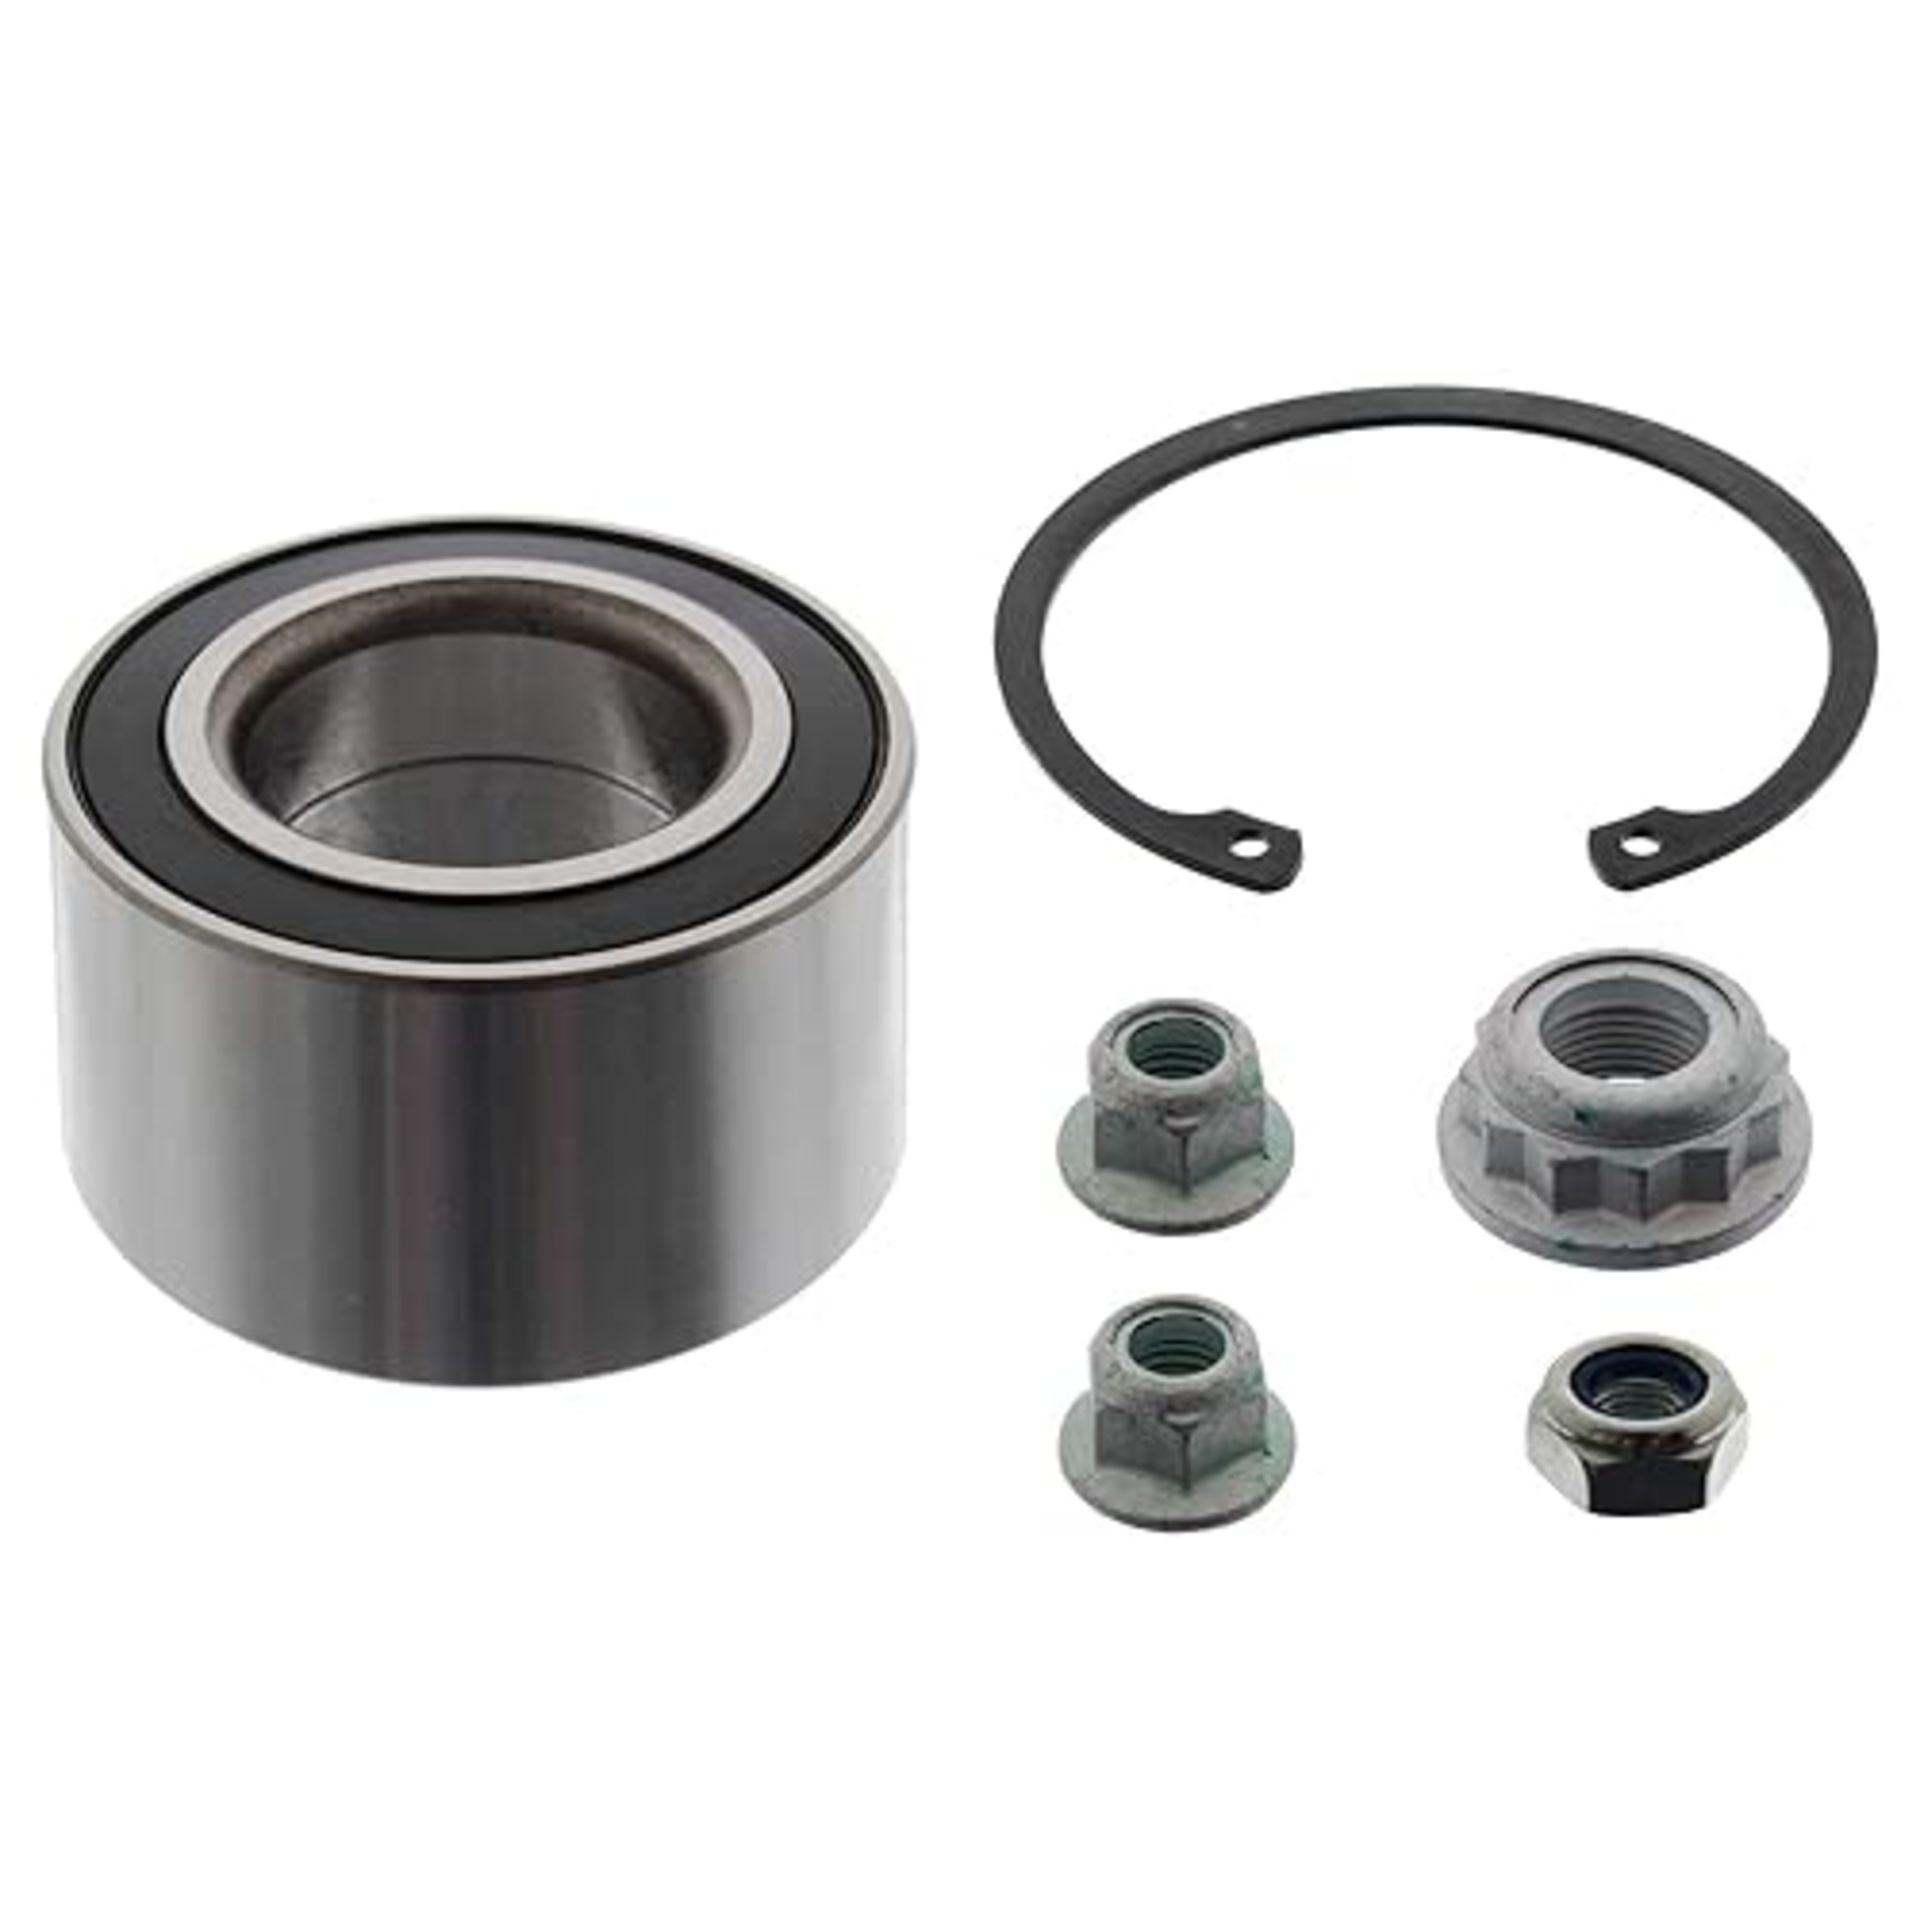 febi bilstein 14250 Wheel Bearing Kit with axle nut, nuts and circlip, pack of one